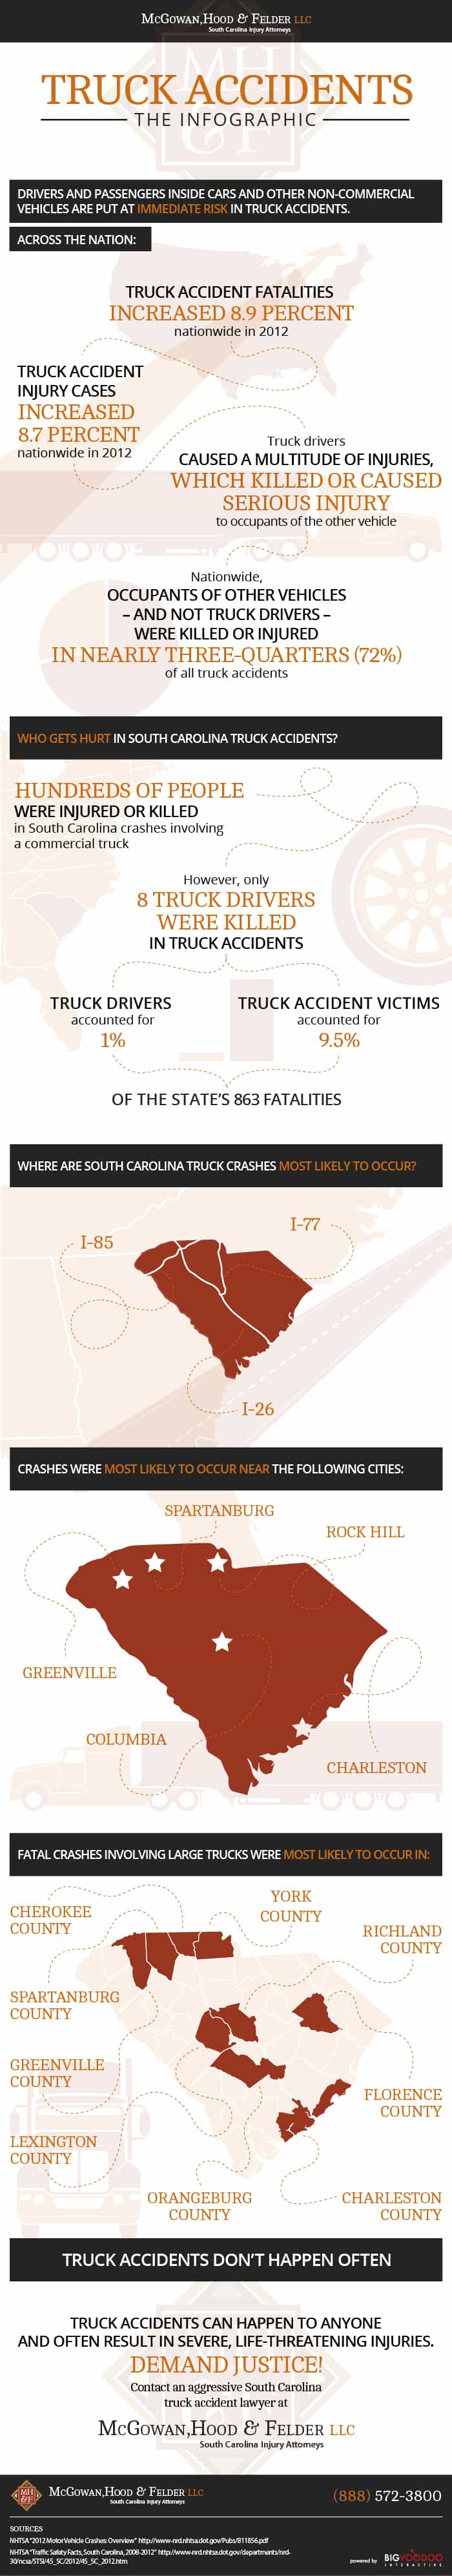 McGowan-Hood-Truck-Accident-Lawyer-Infographic